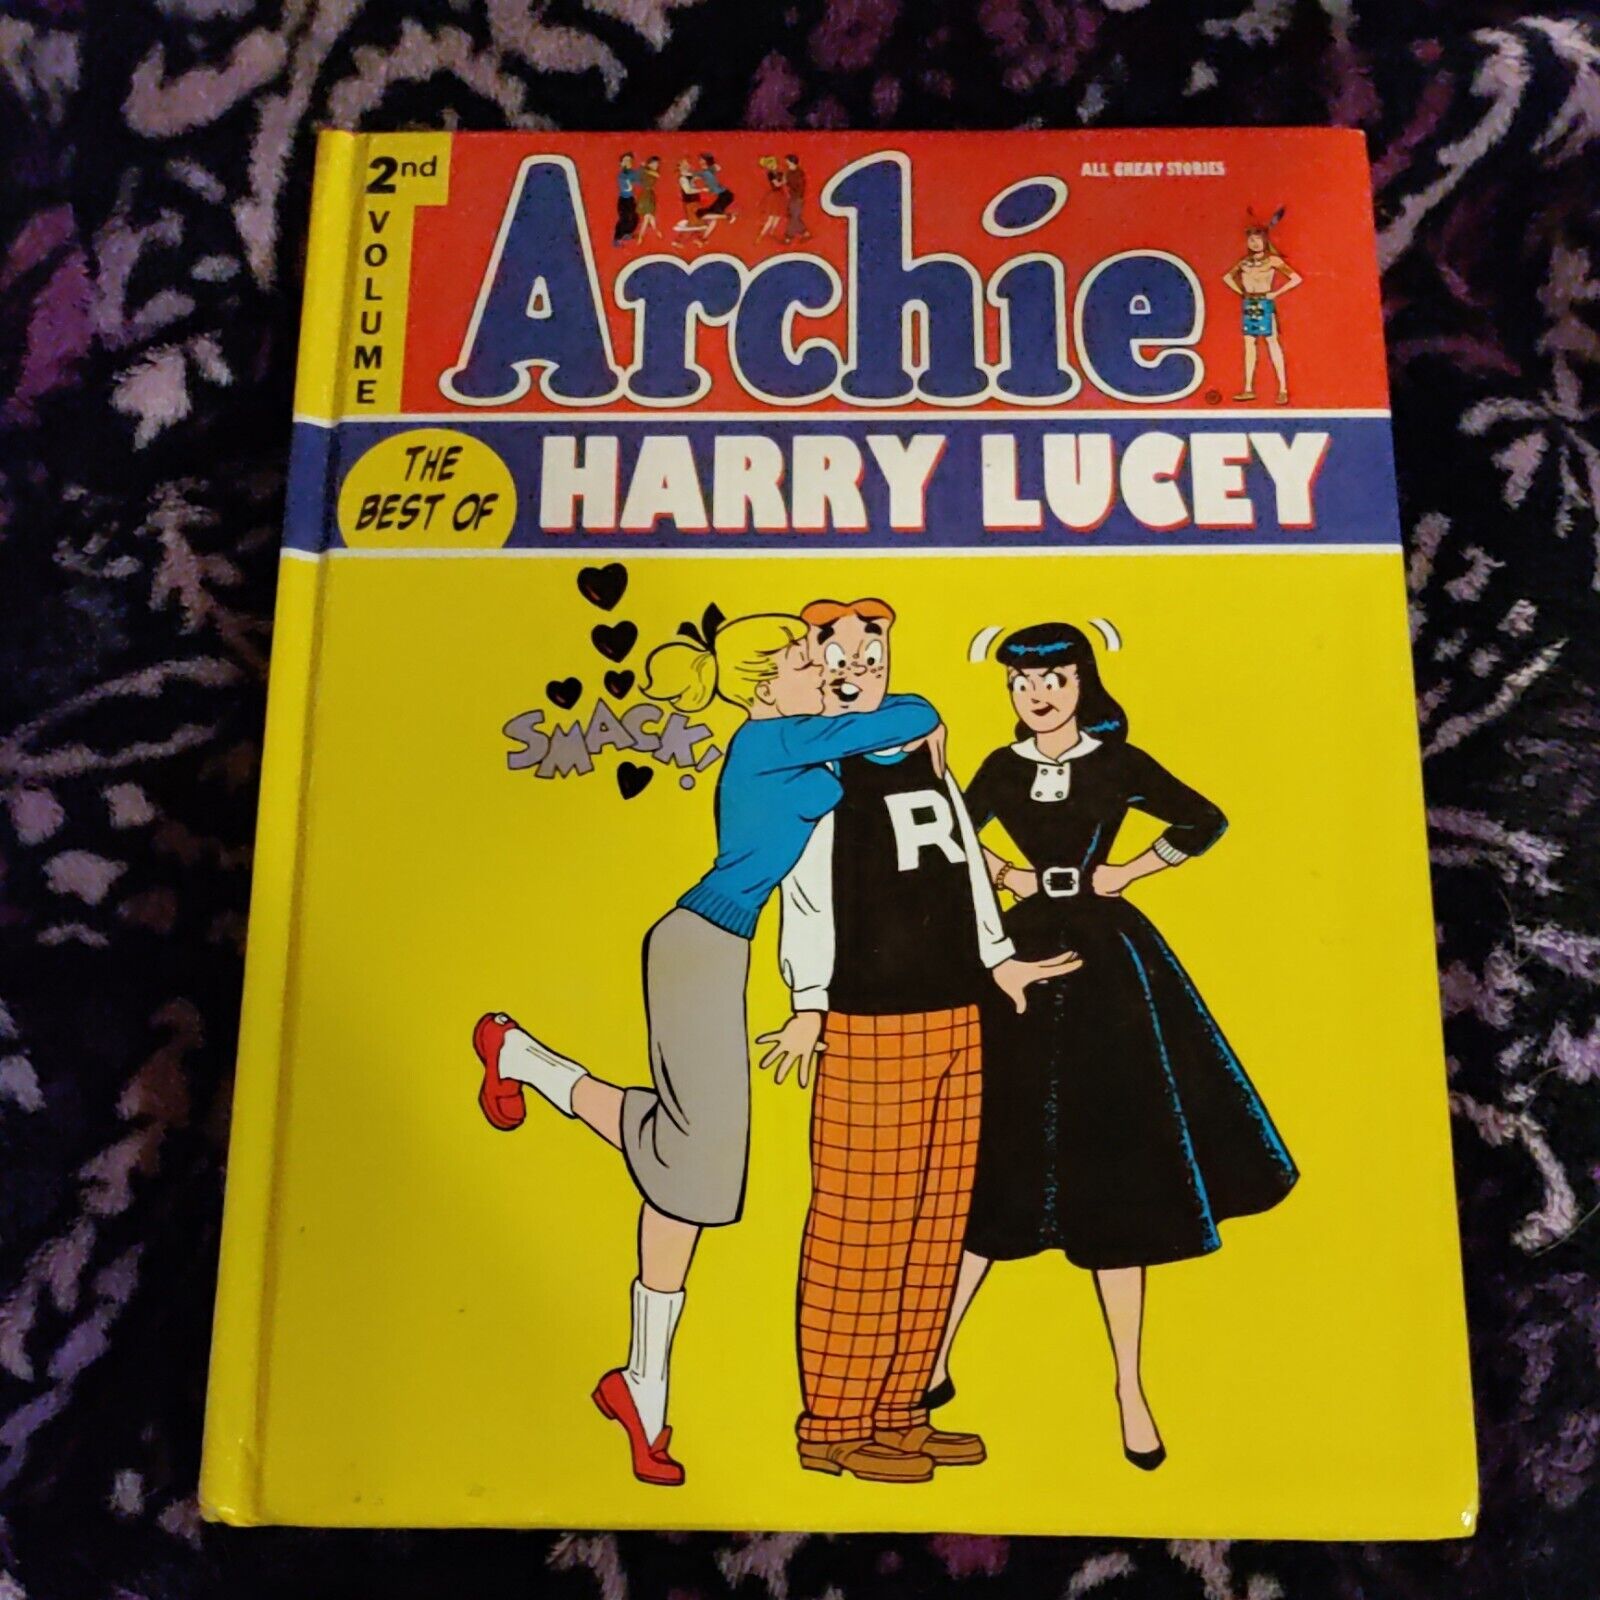 🔥Archie: The Best of Harry Lucey #2 (IDW Publishing, 2012)🔥